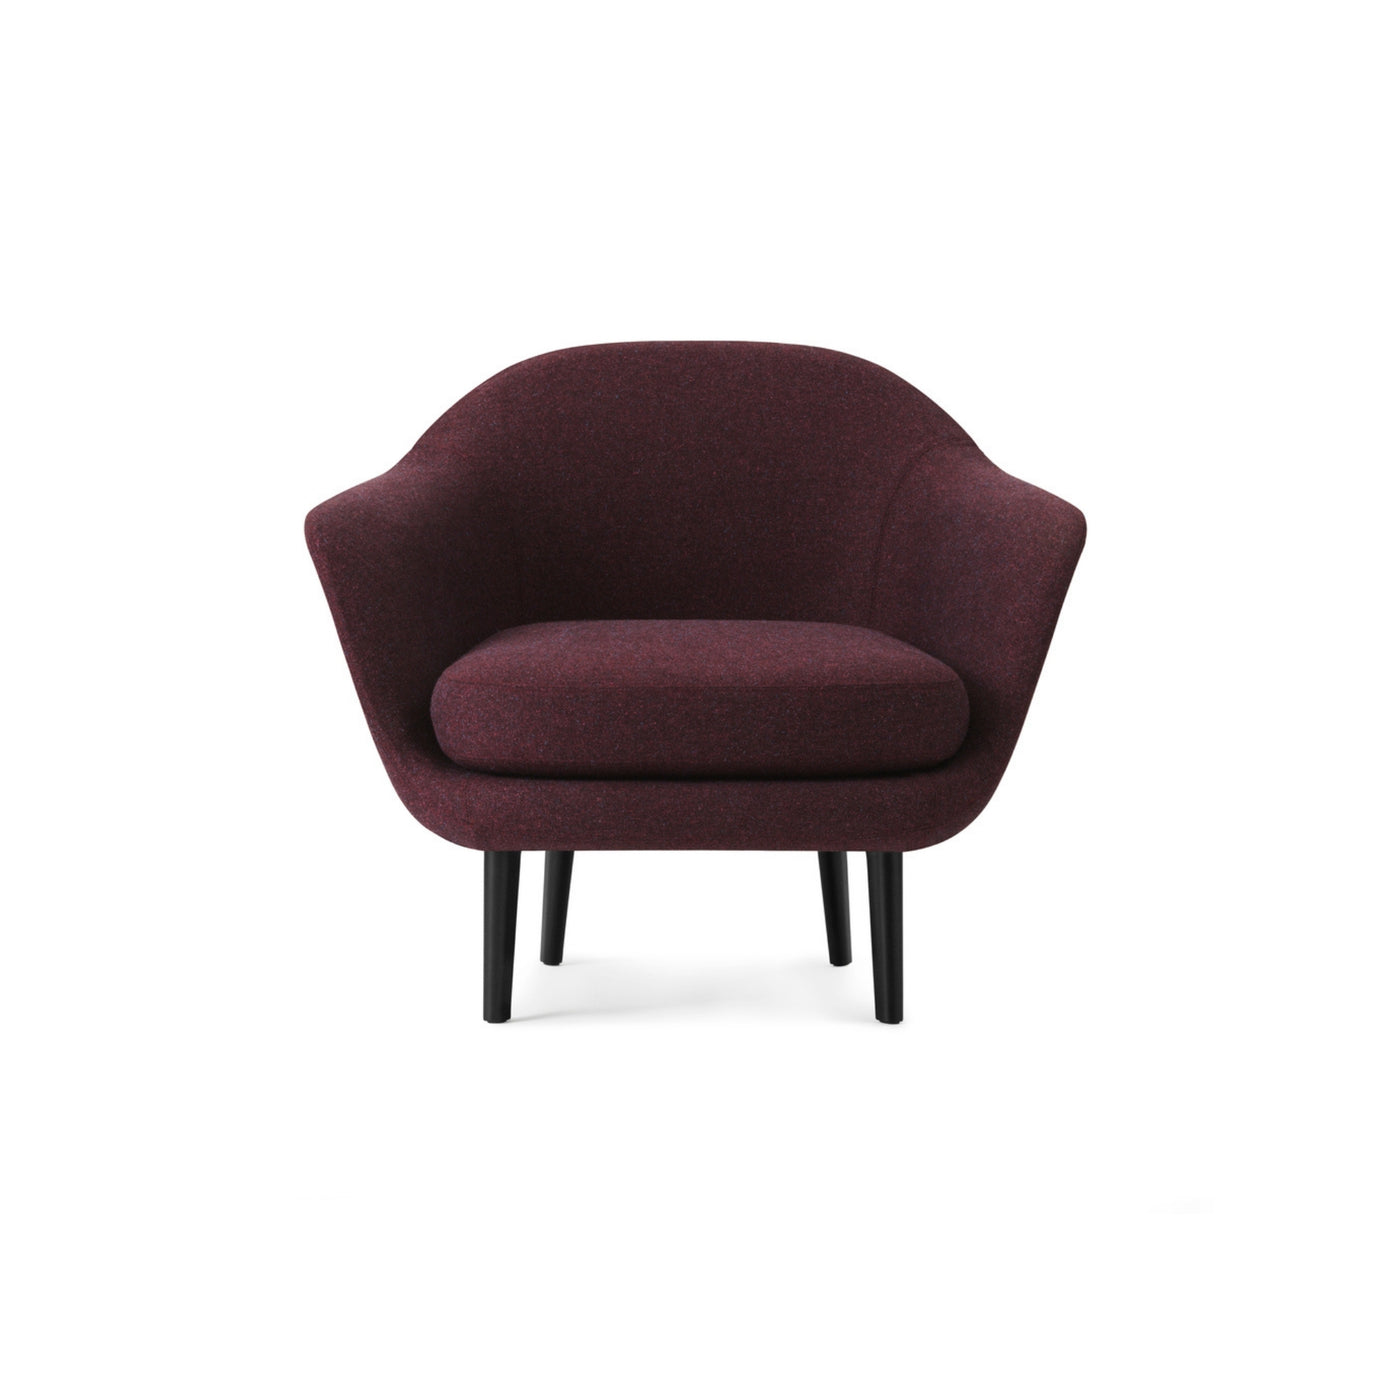 Normann Copenhagen Sum Armchair. Made to order at someday designs. #colour_synergy-process